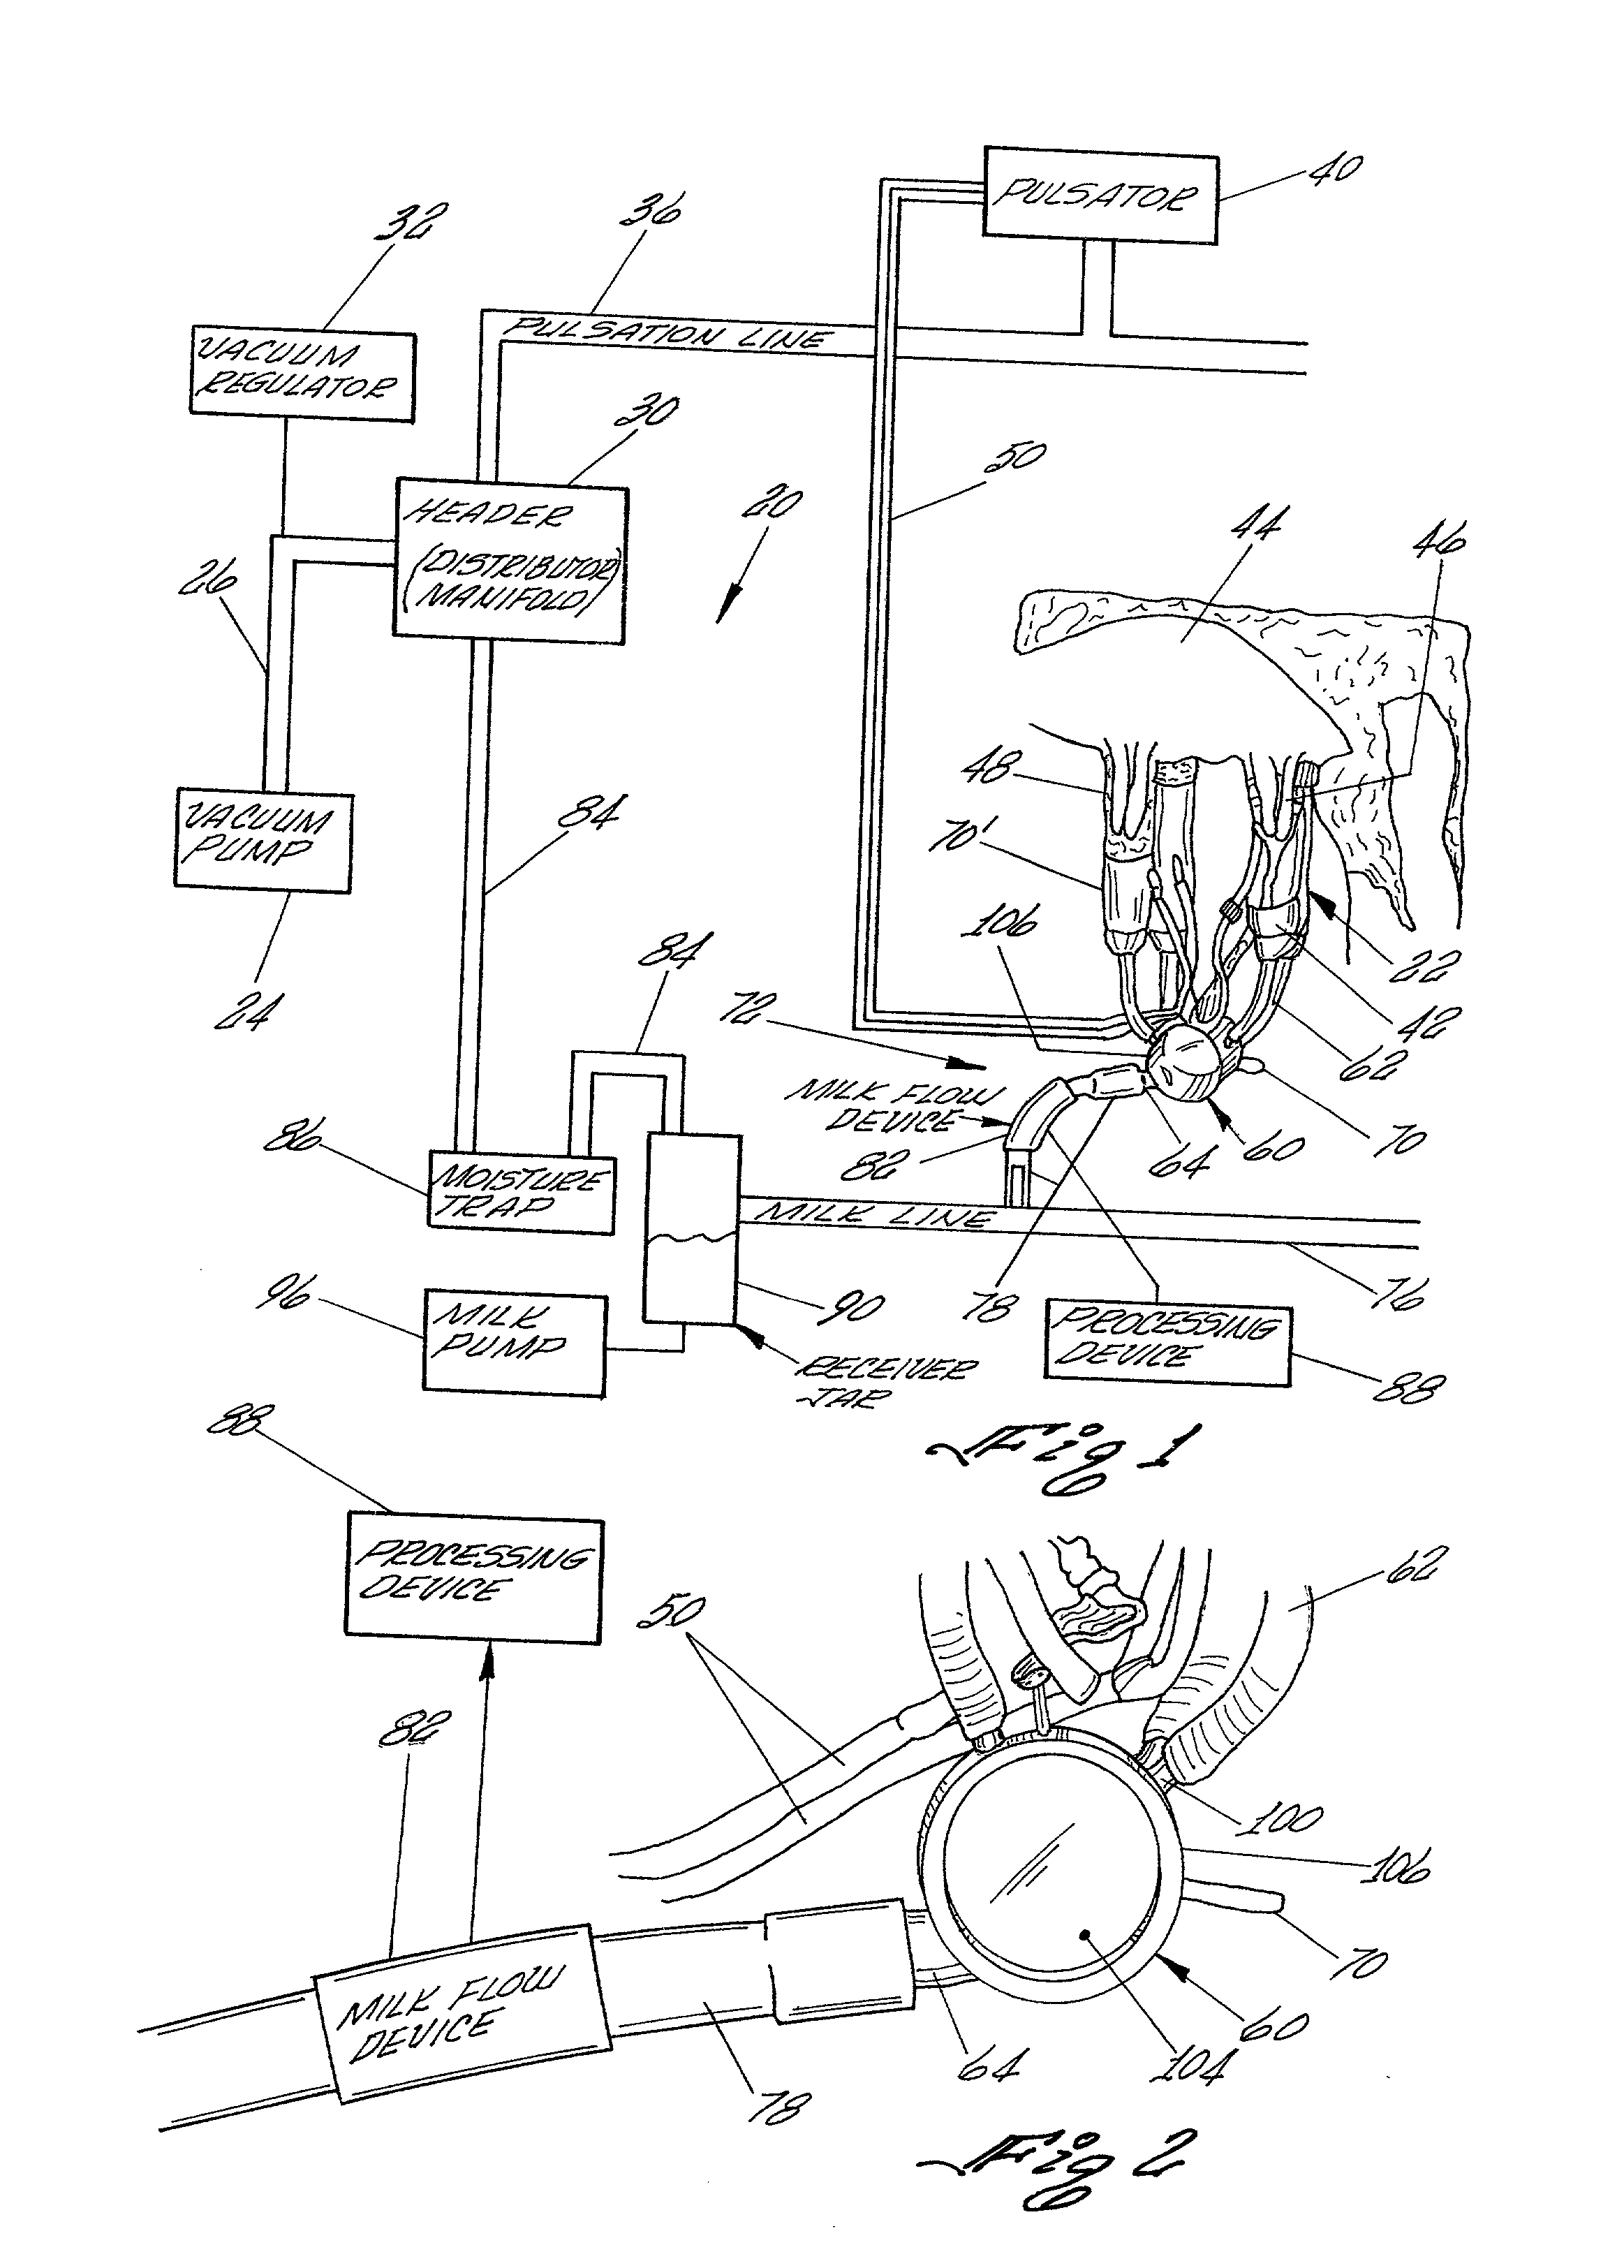 Method for measuring flow rate of a continuous fluid flow